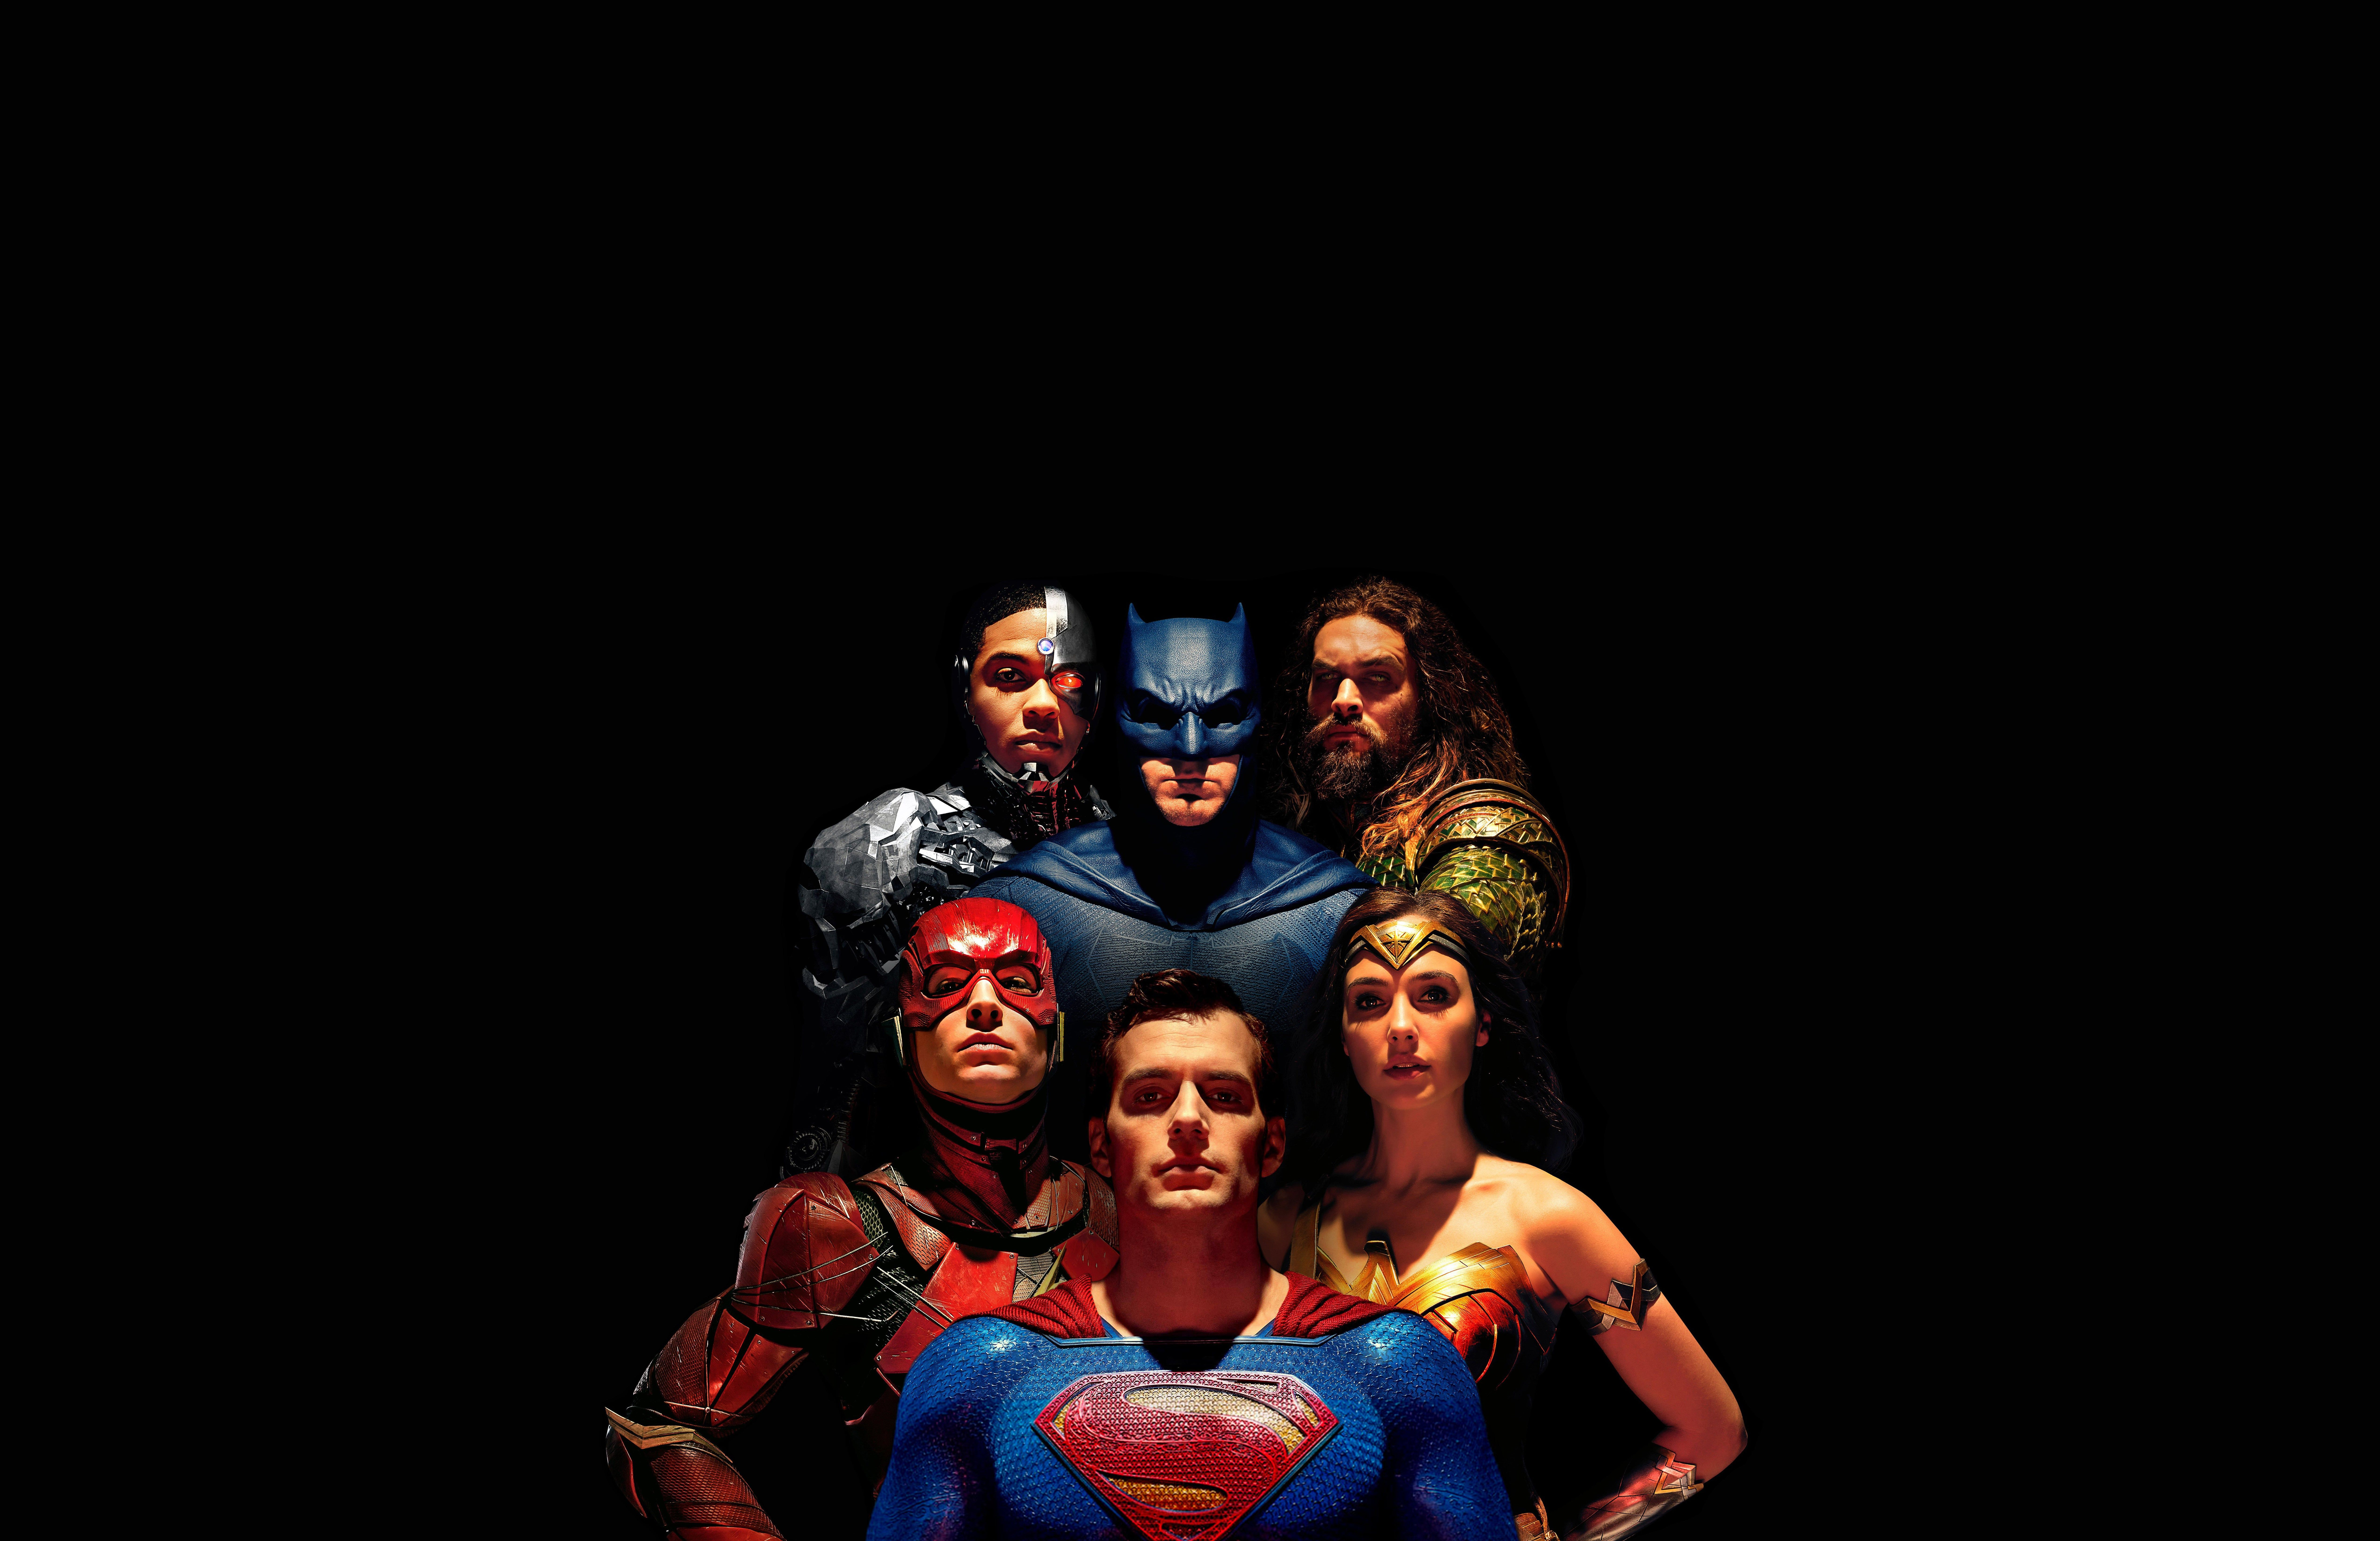 PHOTOSHOP: Ultra High Res Justice League Wallpaper For Any Phone